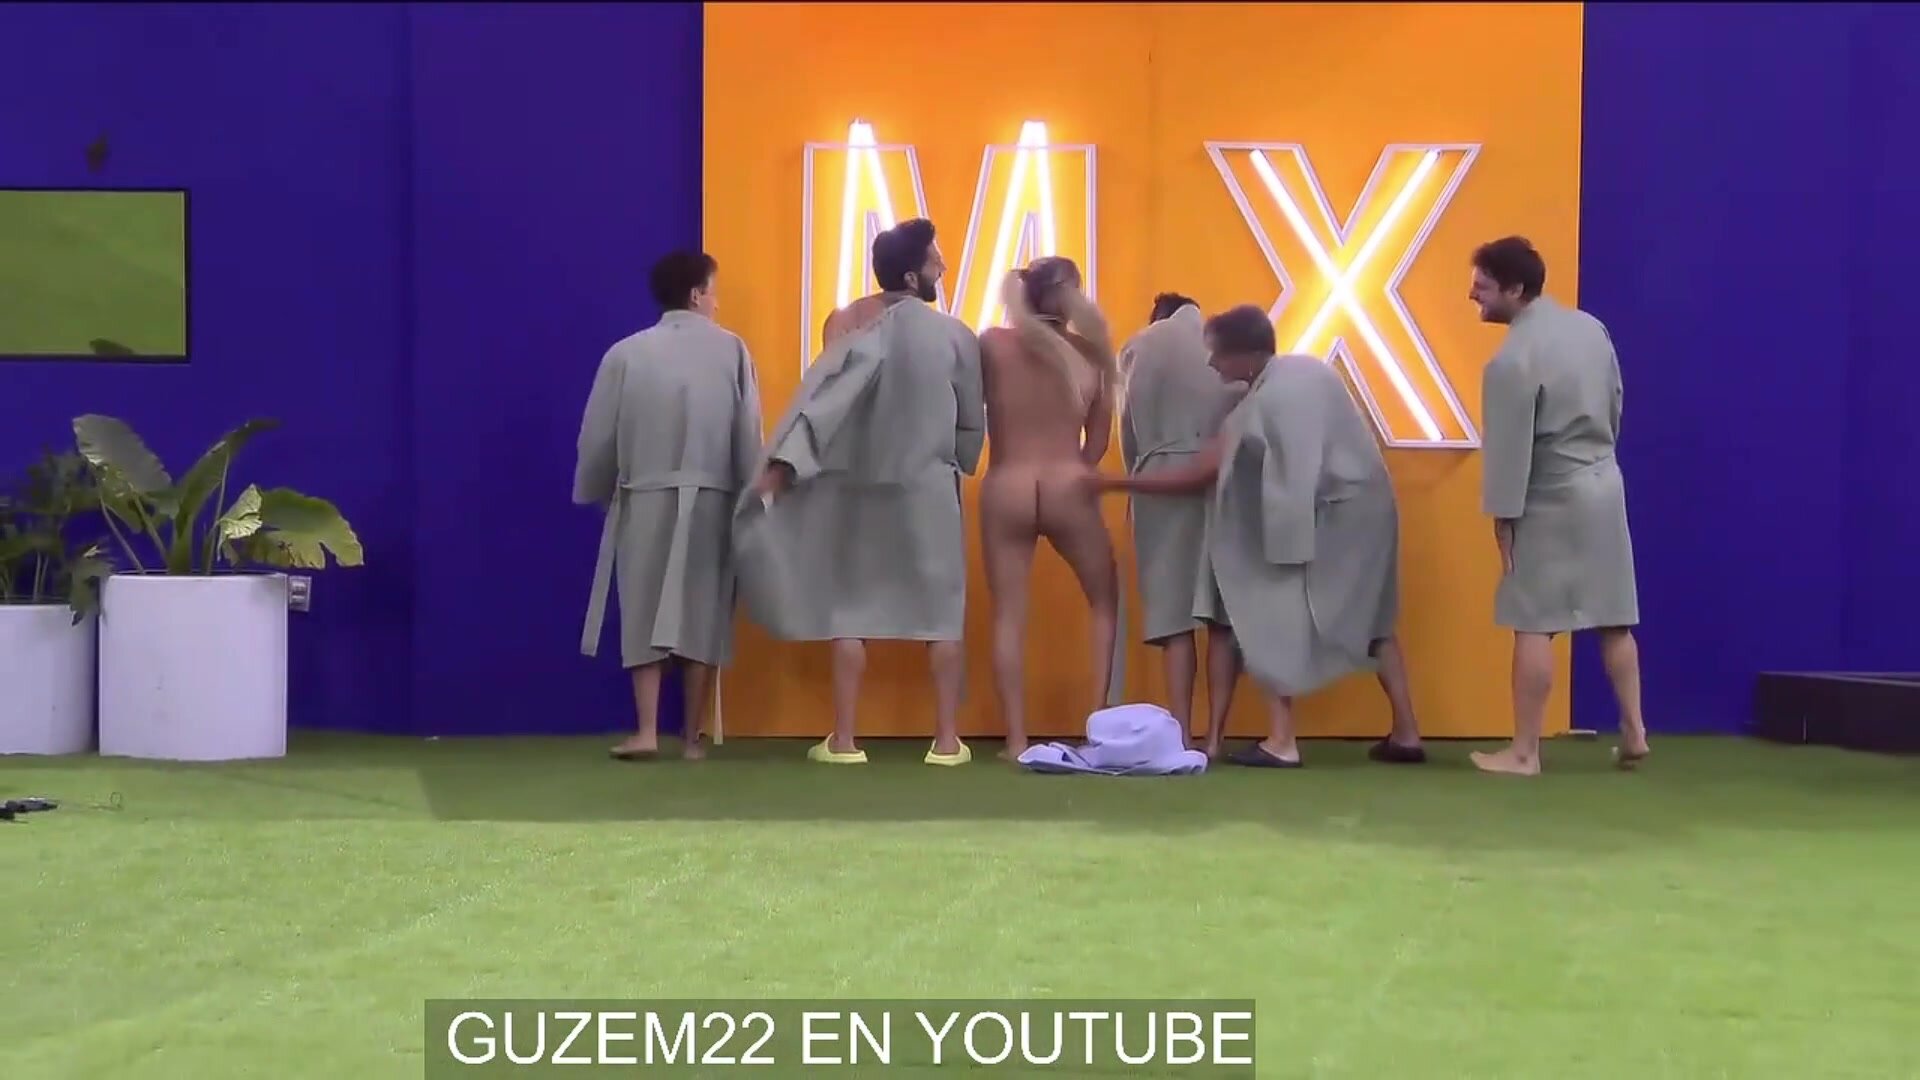 Participants of a reality show strip naked for a bet